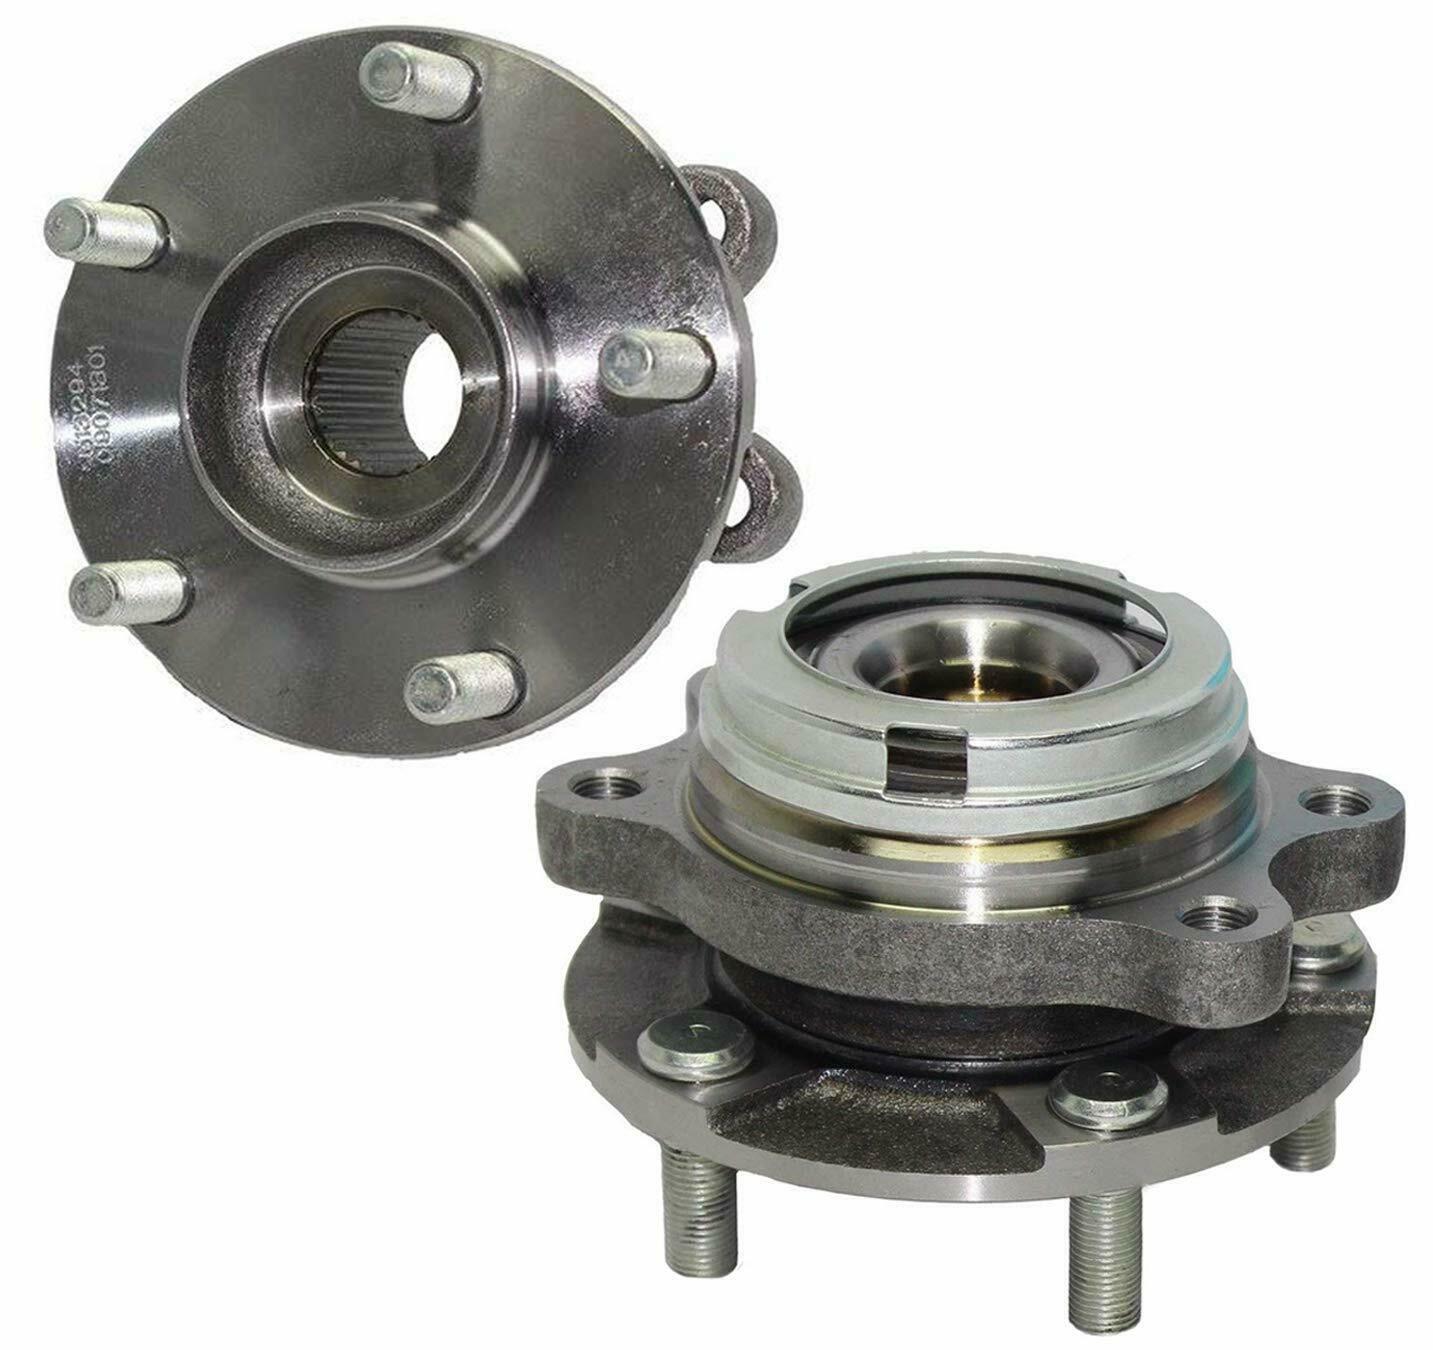 LEFT /& RIGHT-PAIR NEW 2007-2013 FORD EDGE FRONT WHEEL HUB BEARING